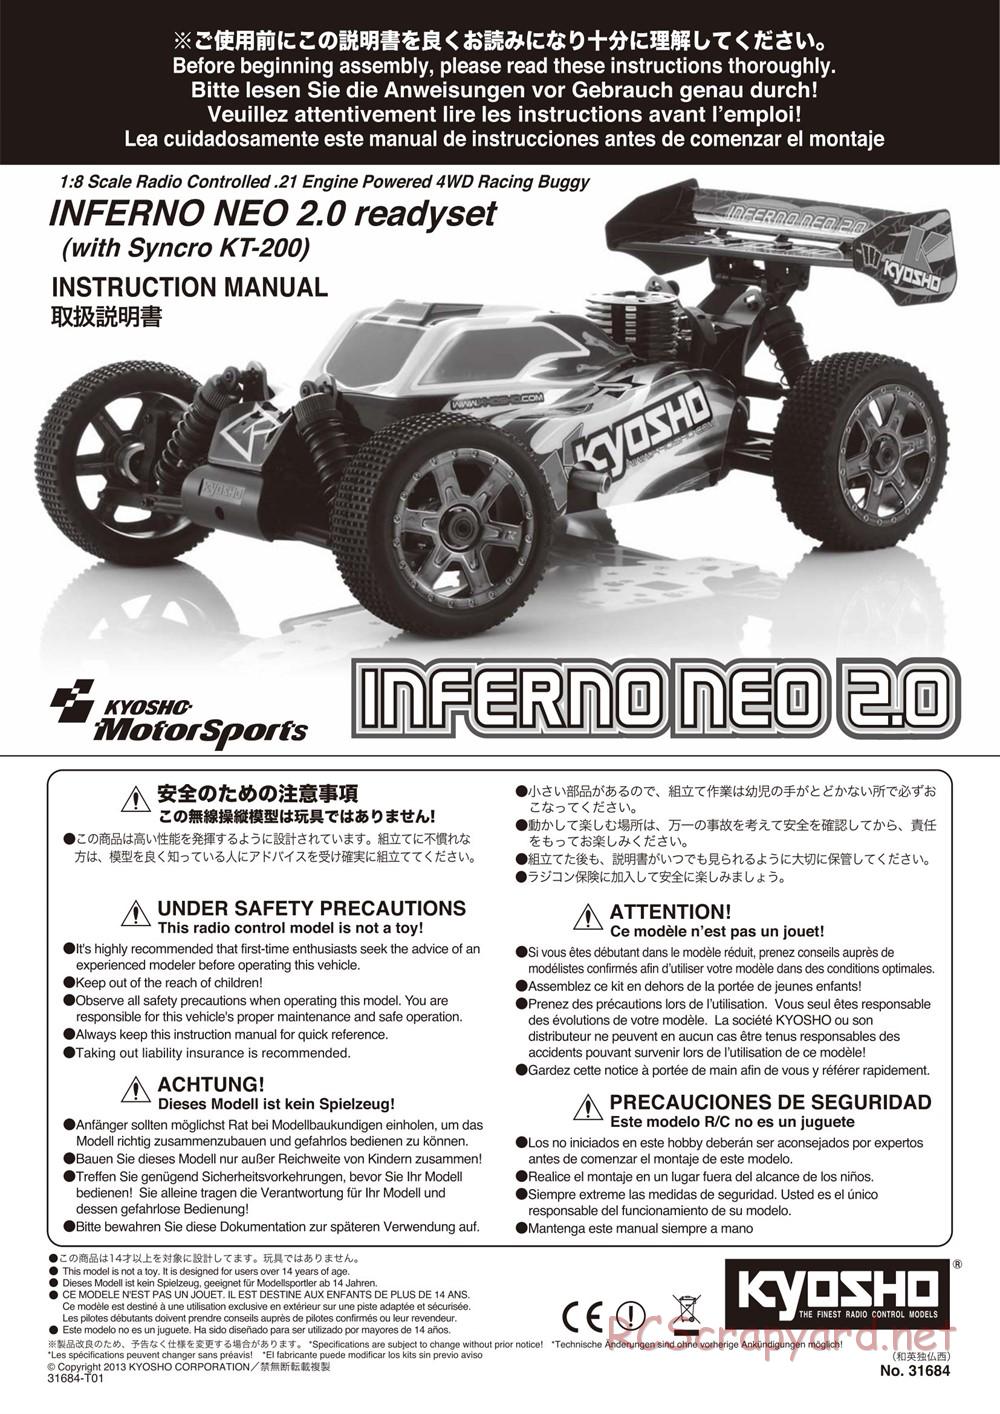 Kyosho - Inferno Neo 2.0 - Manual - Page 1